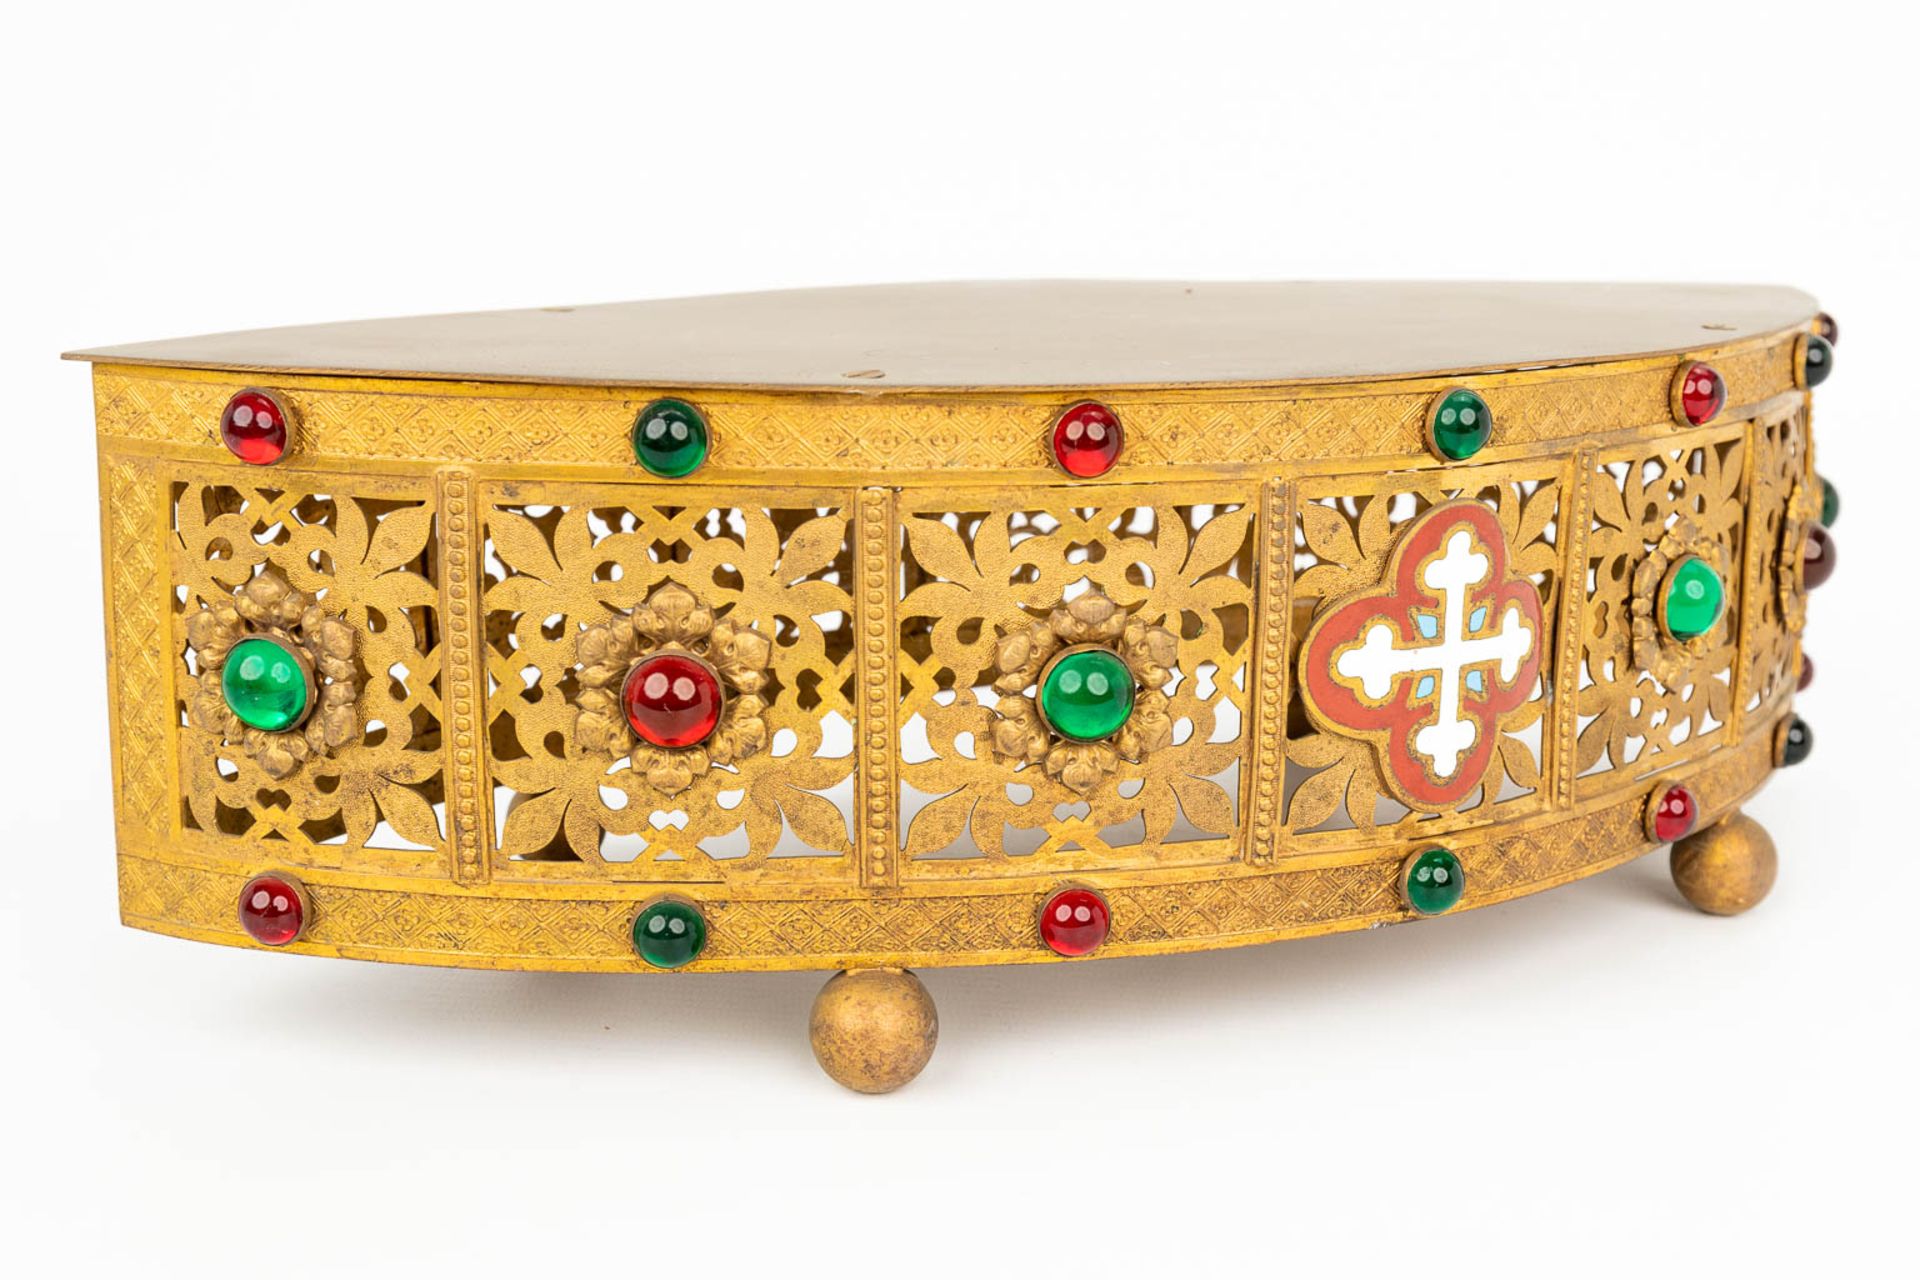 A neogothic base made of brass and decorated with cloisonné enamel and cabochons. (H:11cm) - Image 5 of 11